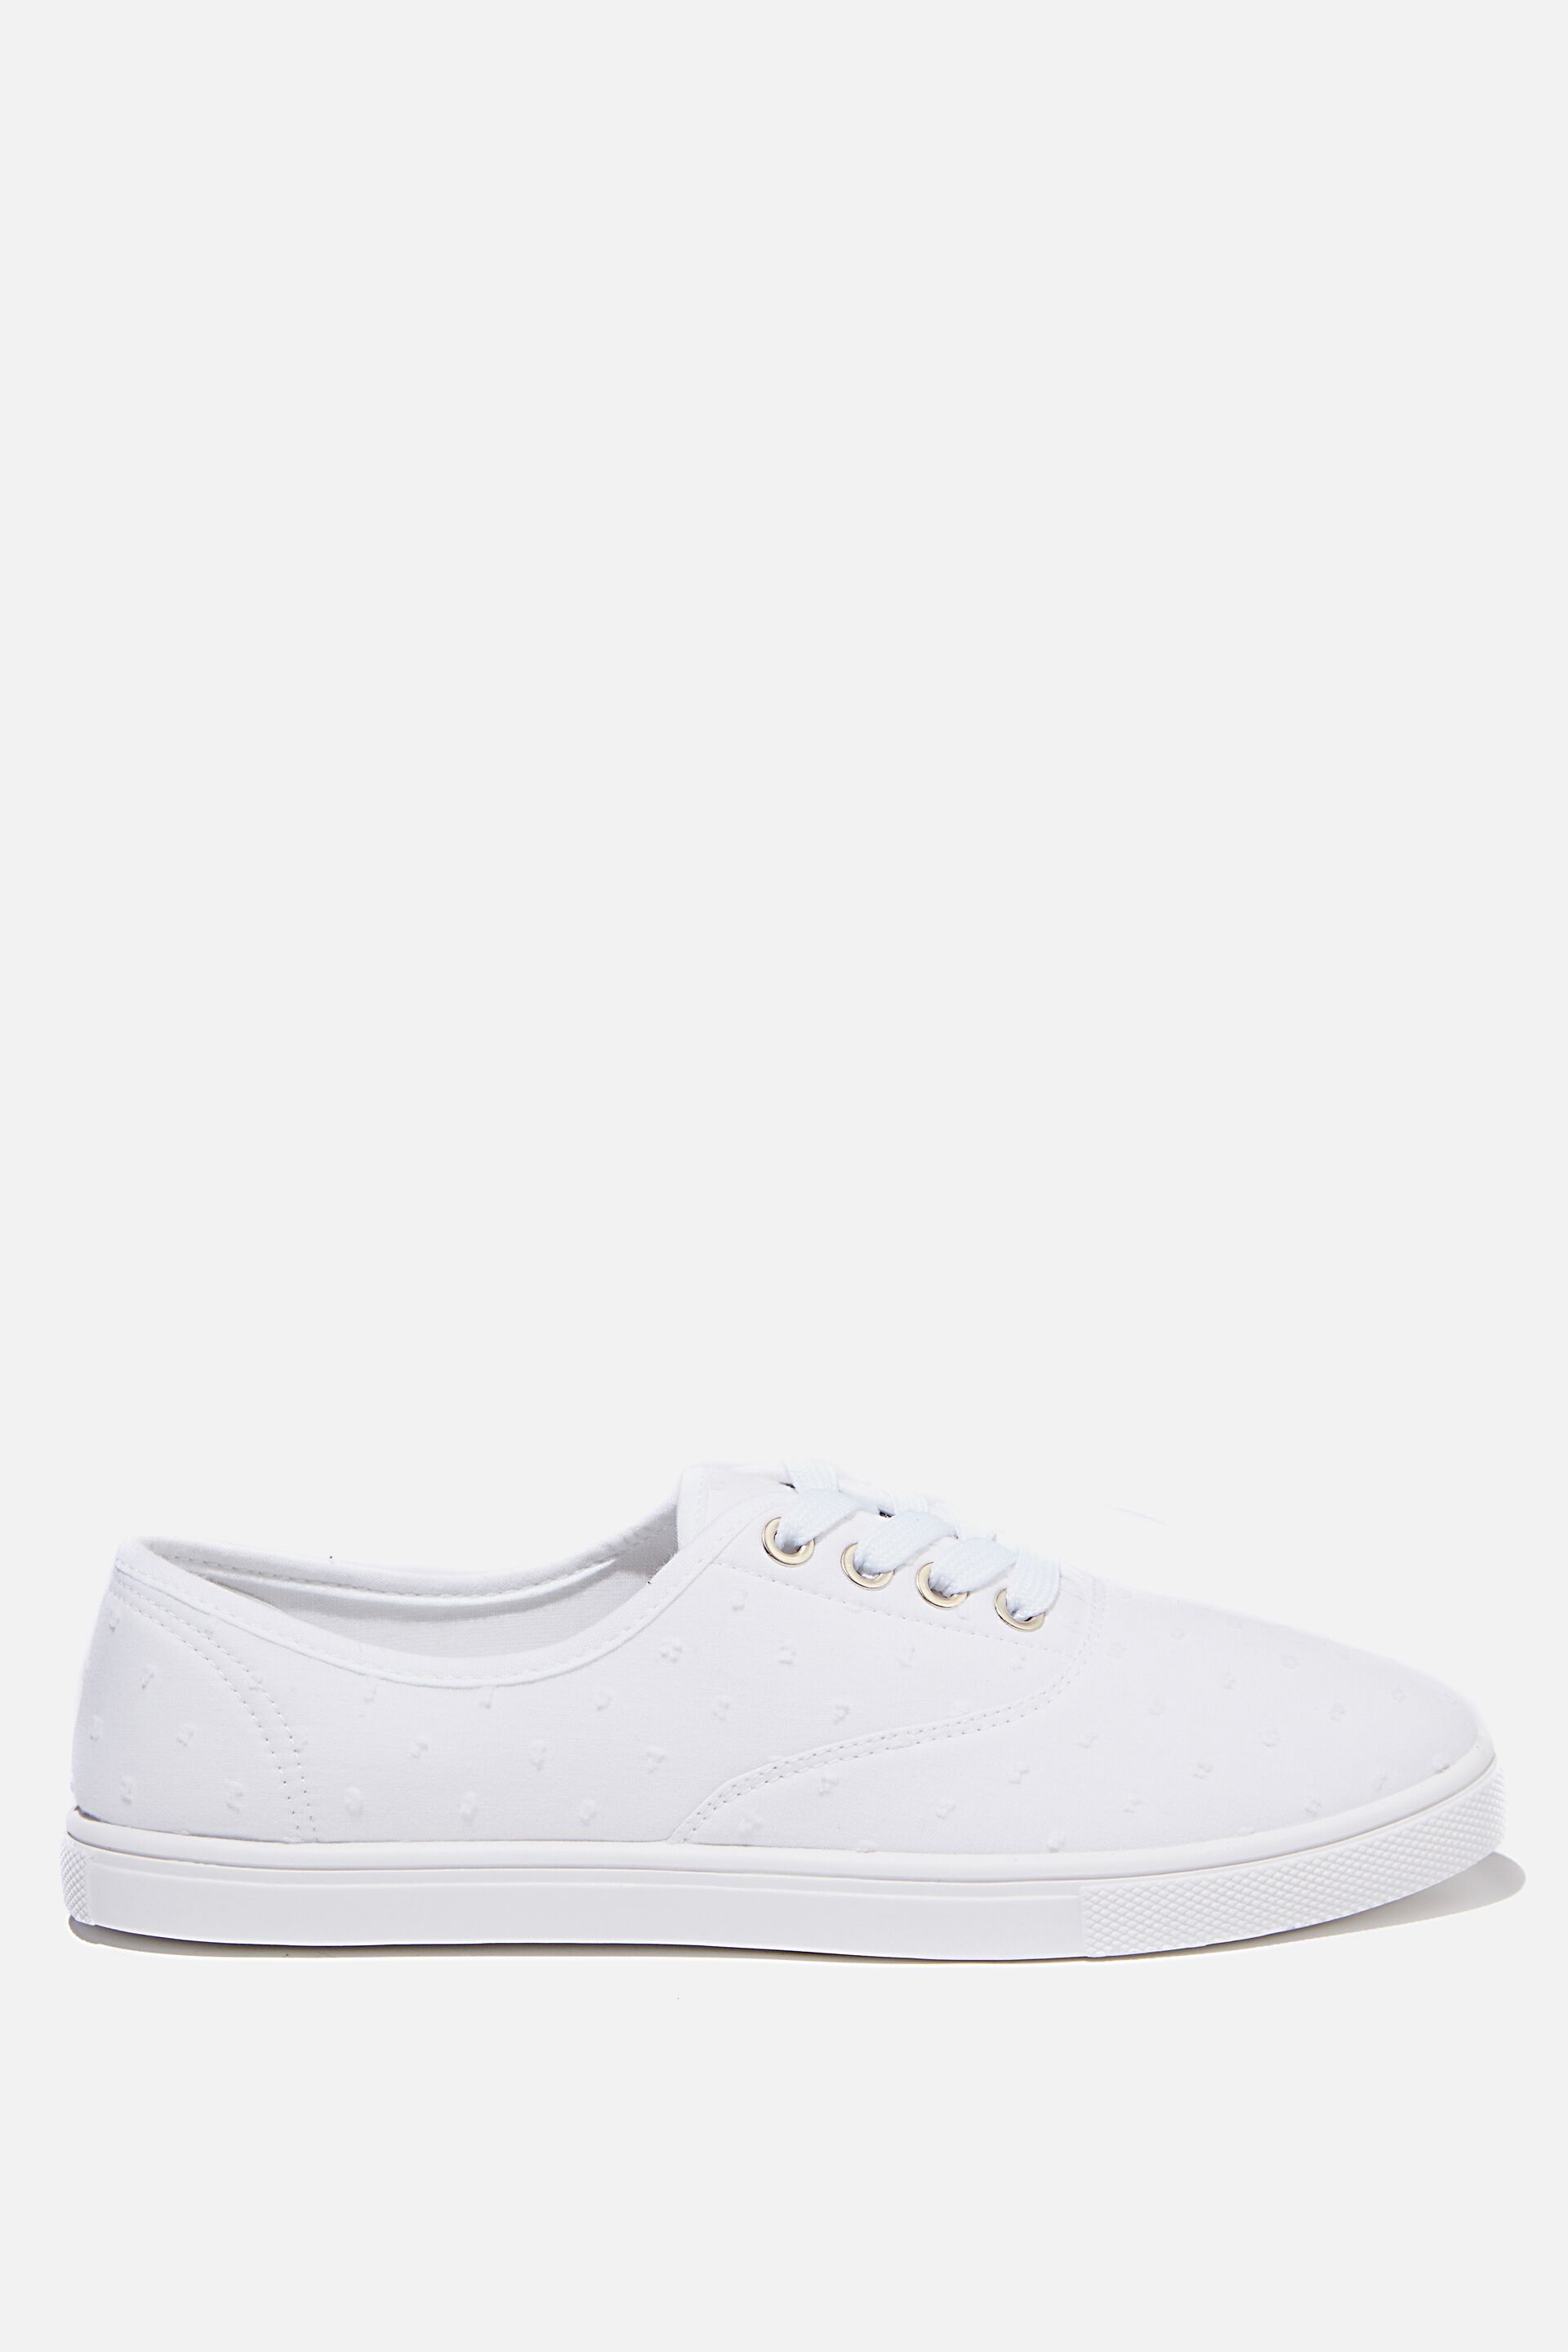 black and white plimsolls womens